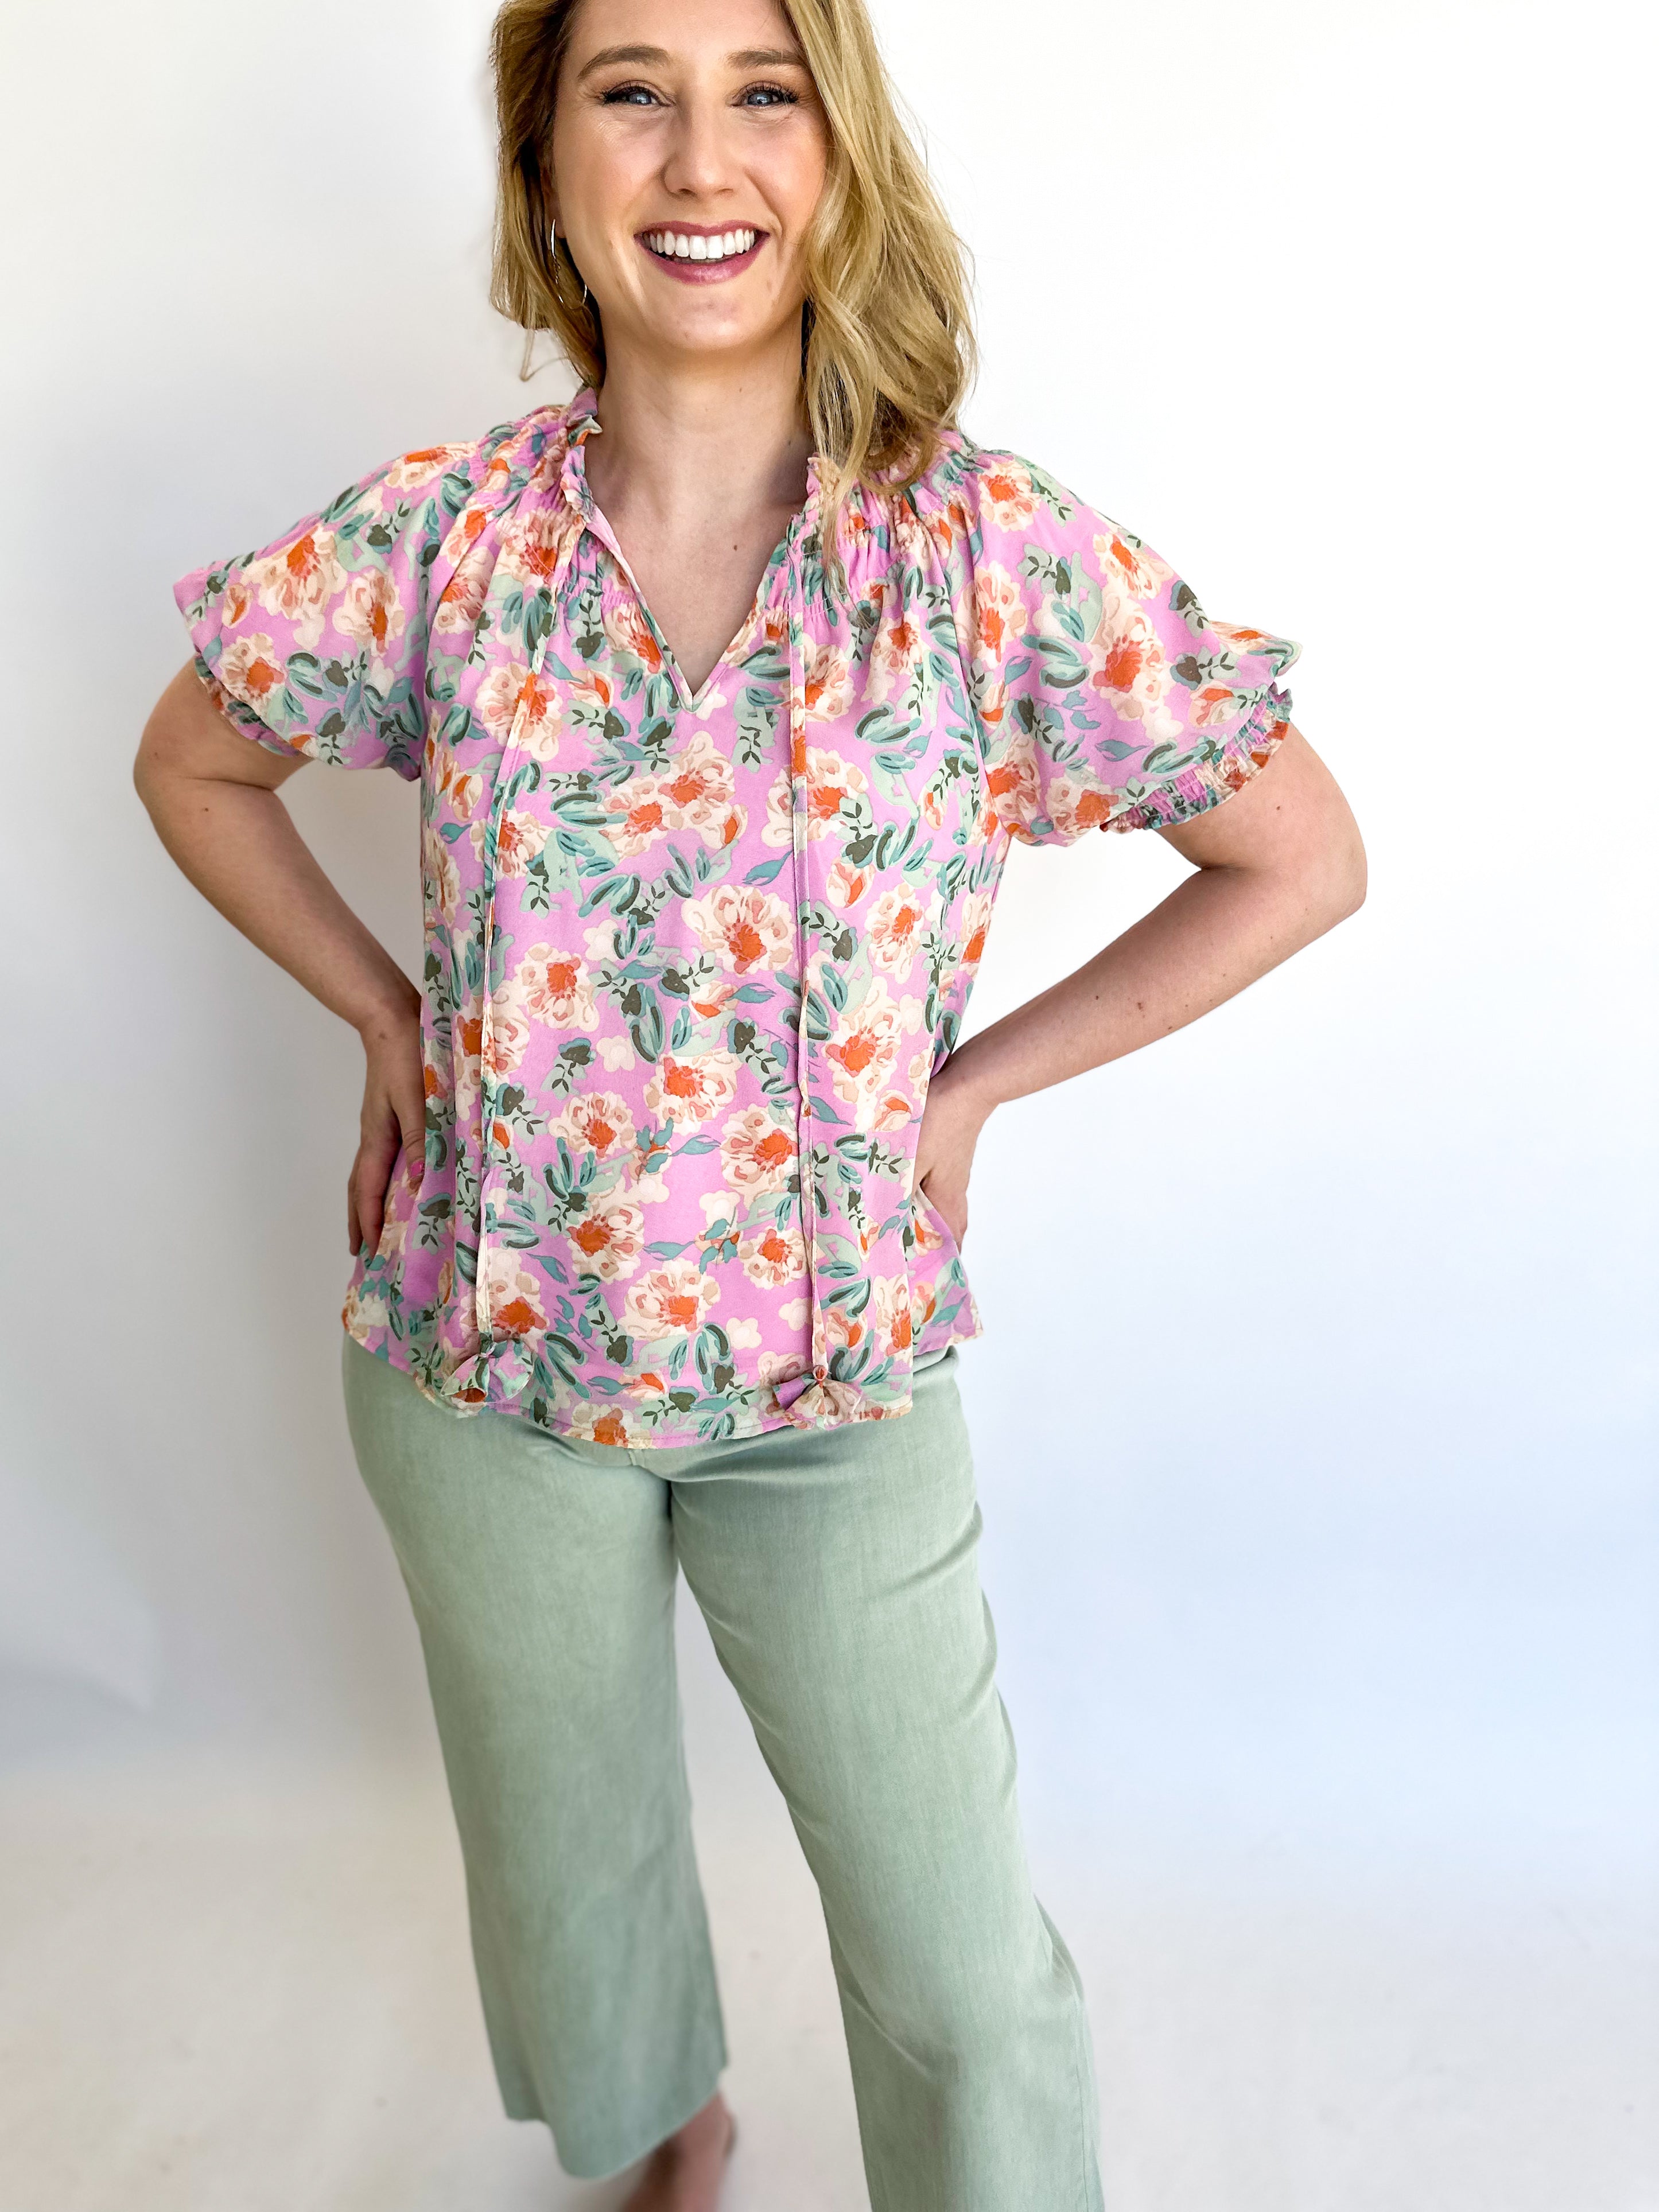 Blooming Blouse-200 Fashion Blouses-JODIFL-July & June Women's Fashion Boutique Located in San Antonio, Texas